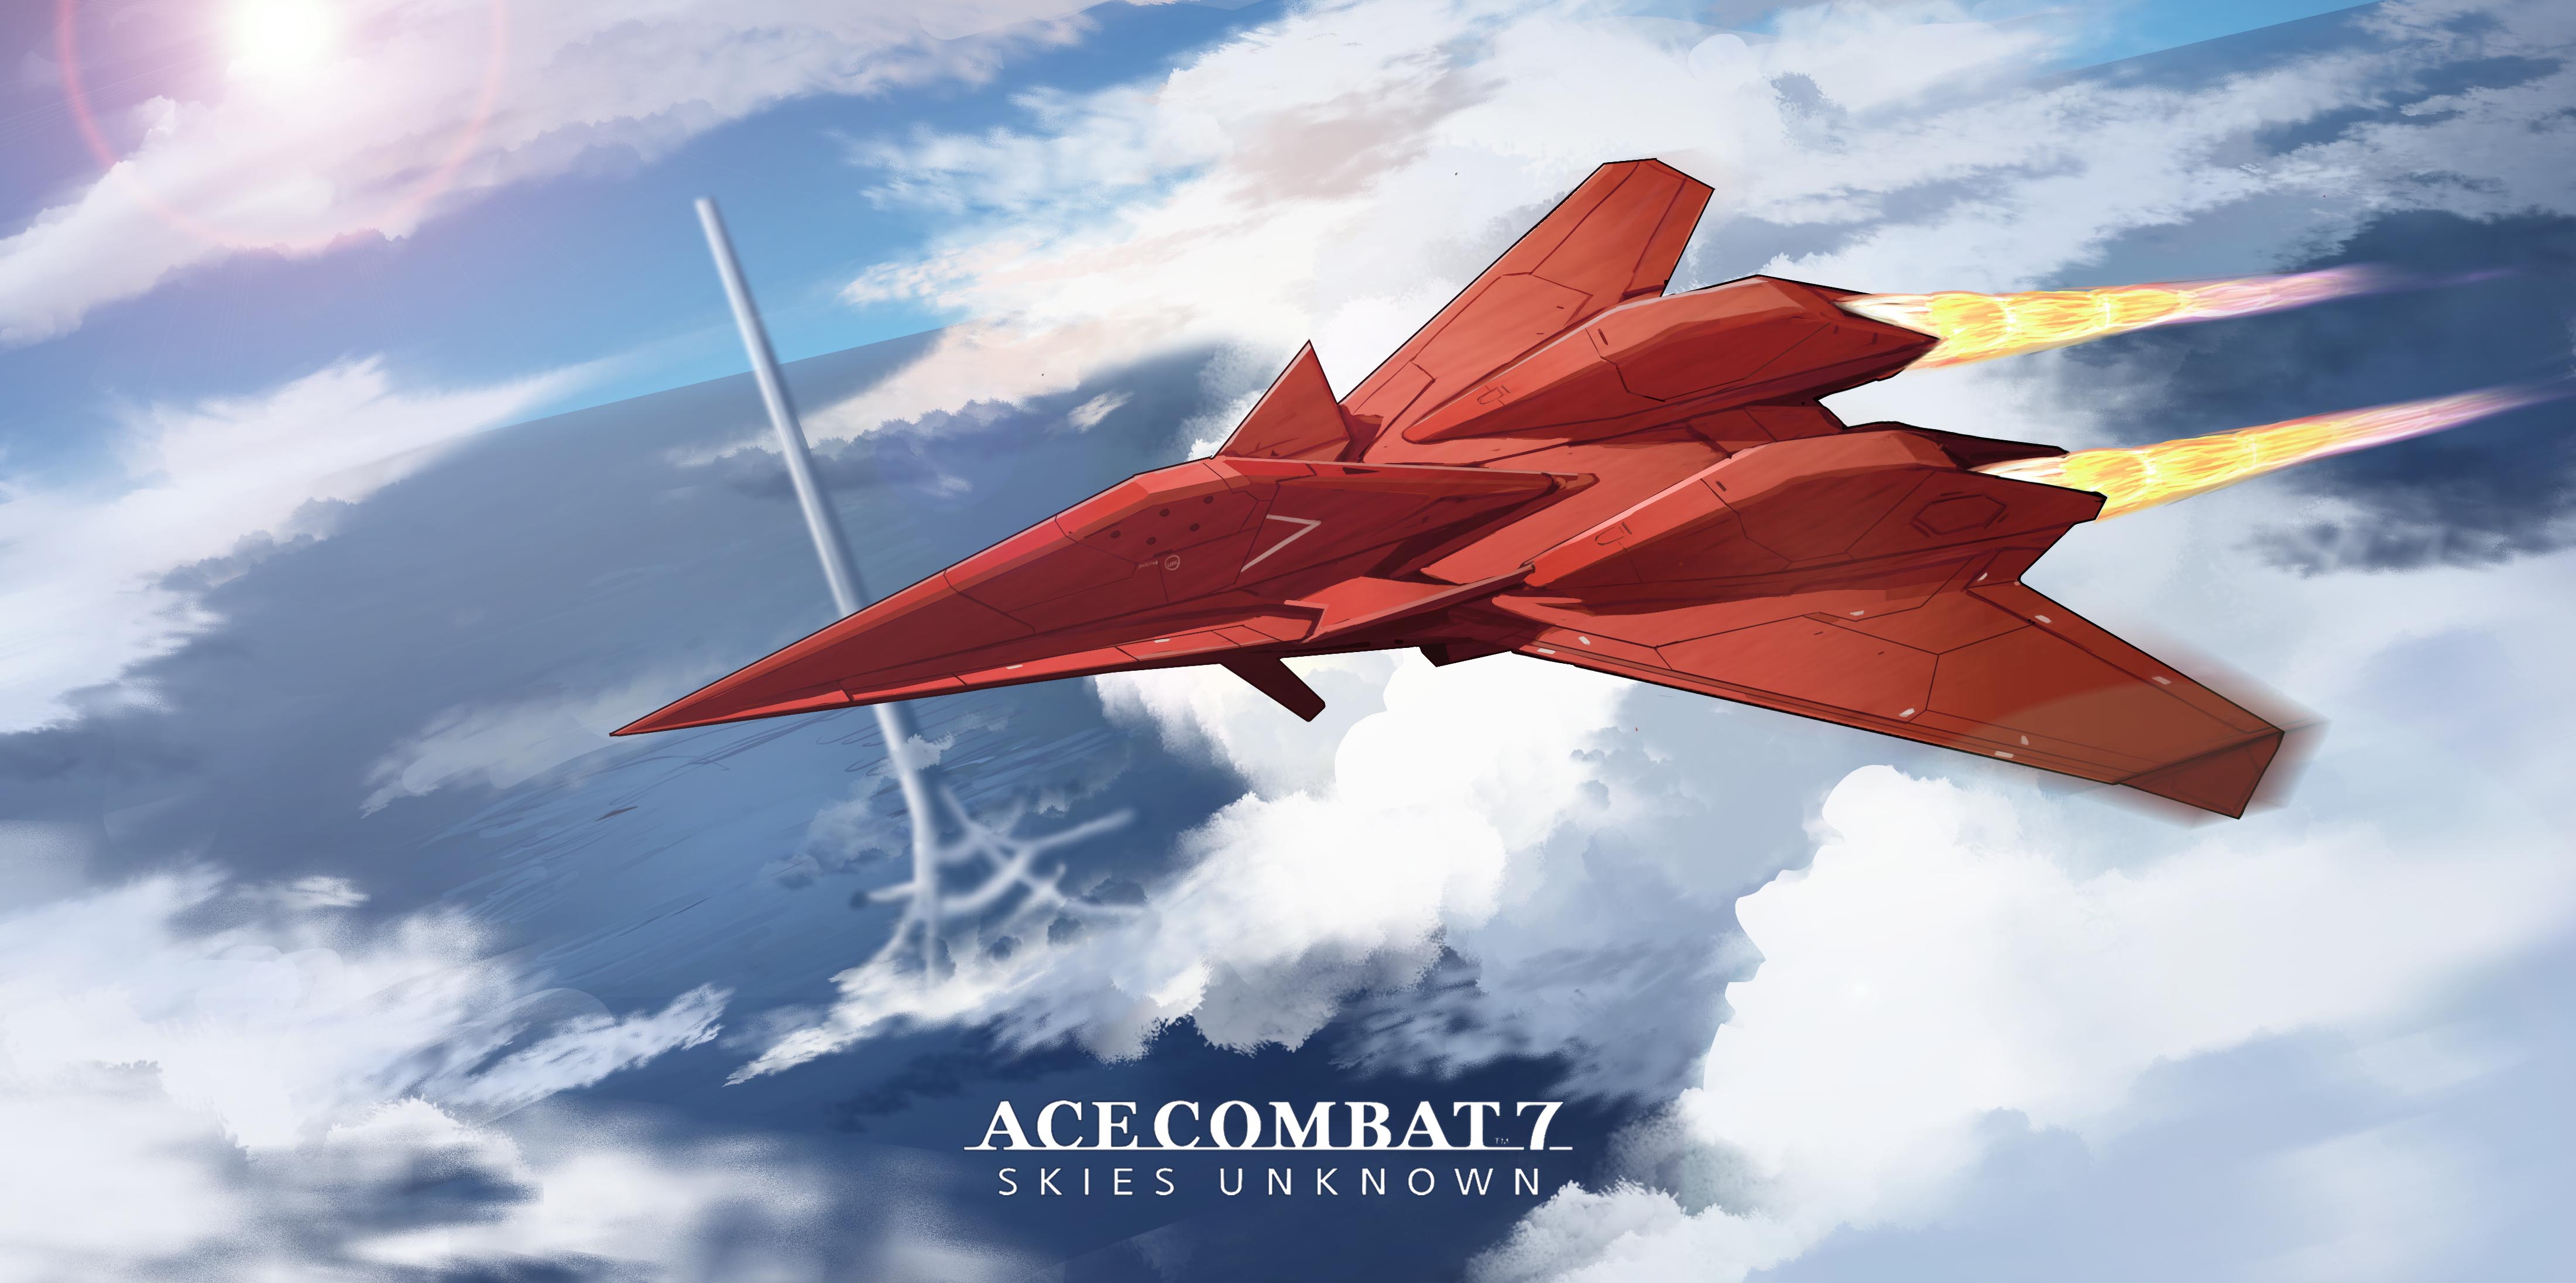 1920x1080  1920x1080 ace combat hd wallpaper for computer   Coolwallpapersme